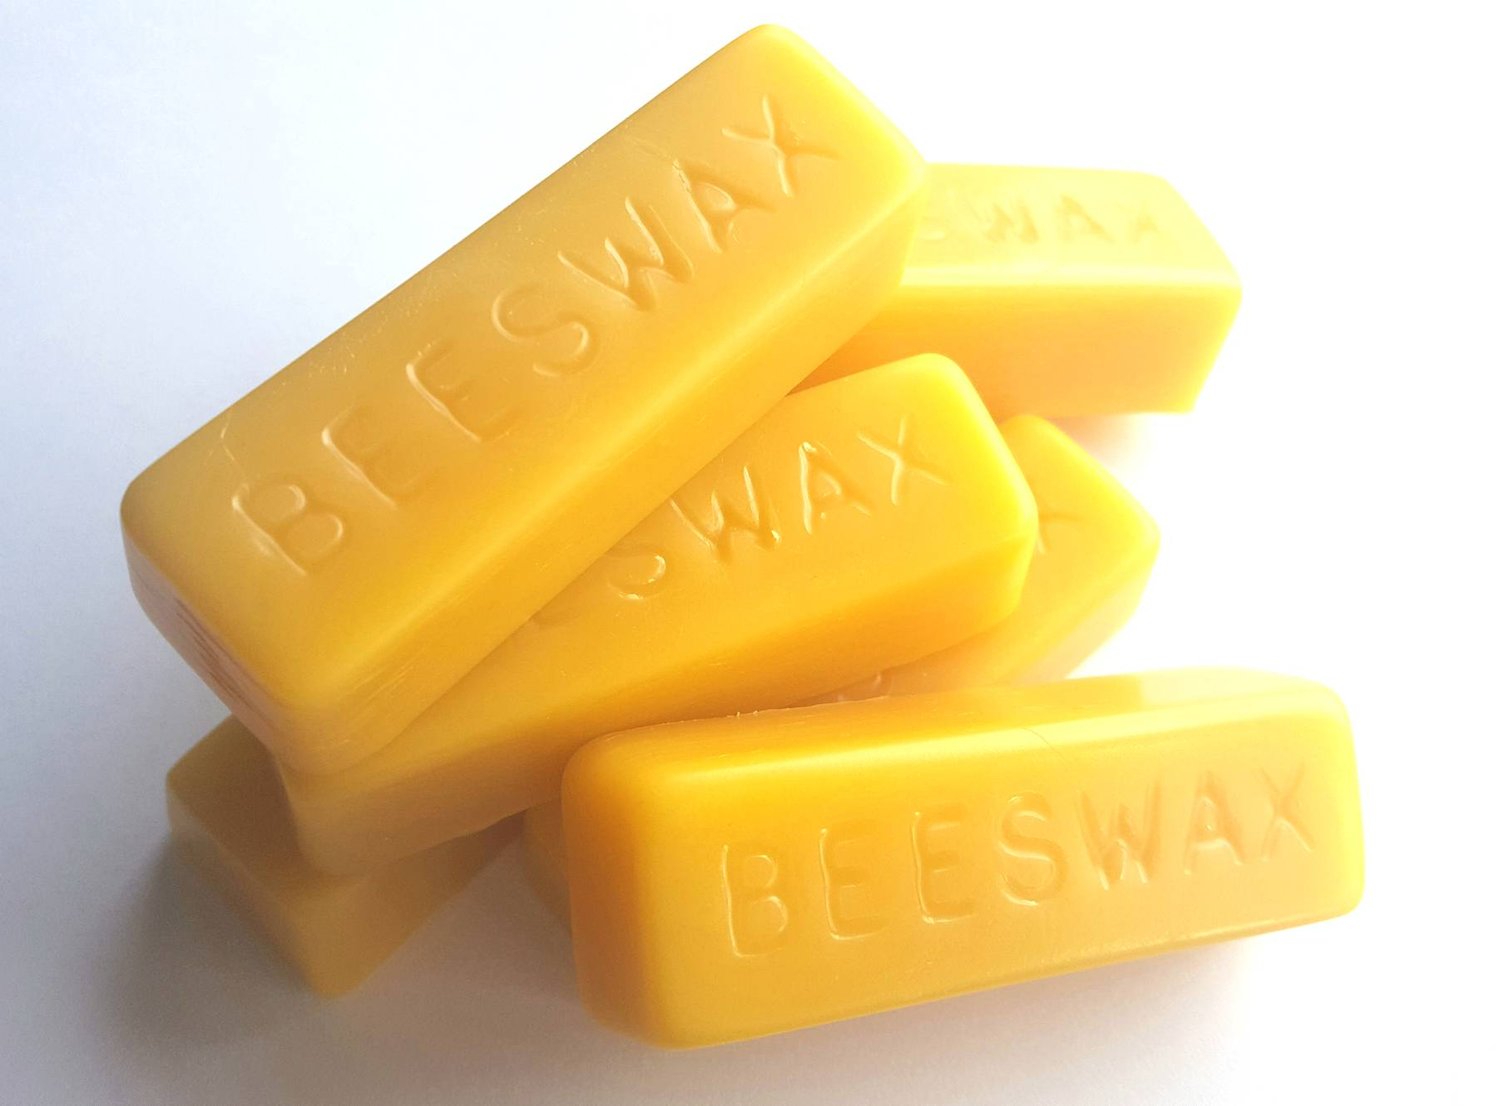 1 ounce Beeswax Bar(s) - 100% Natural - Choose 1, 5, 10, 25, or